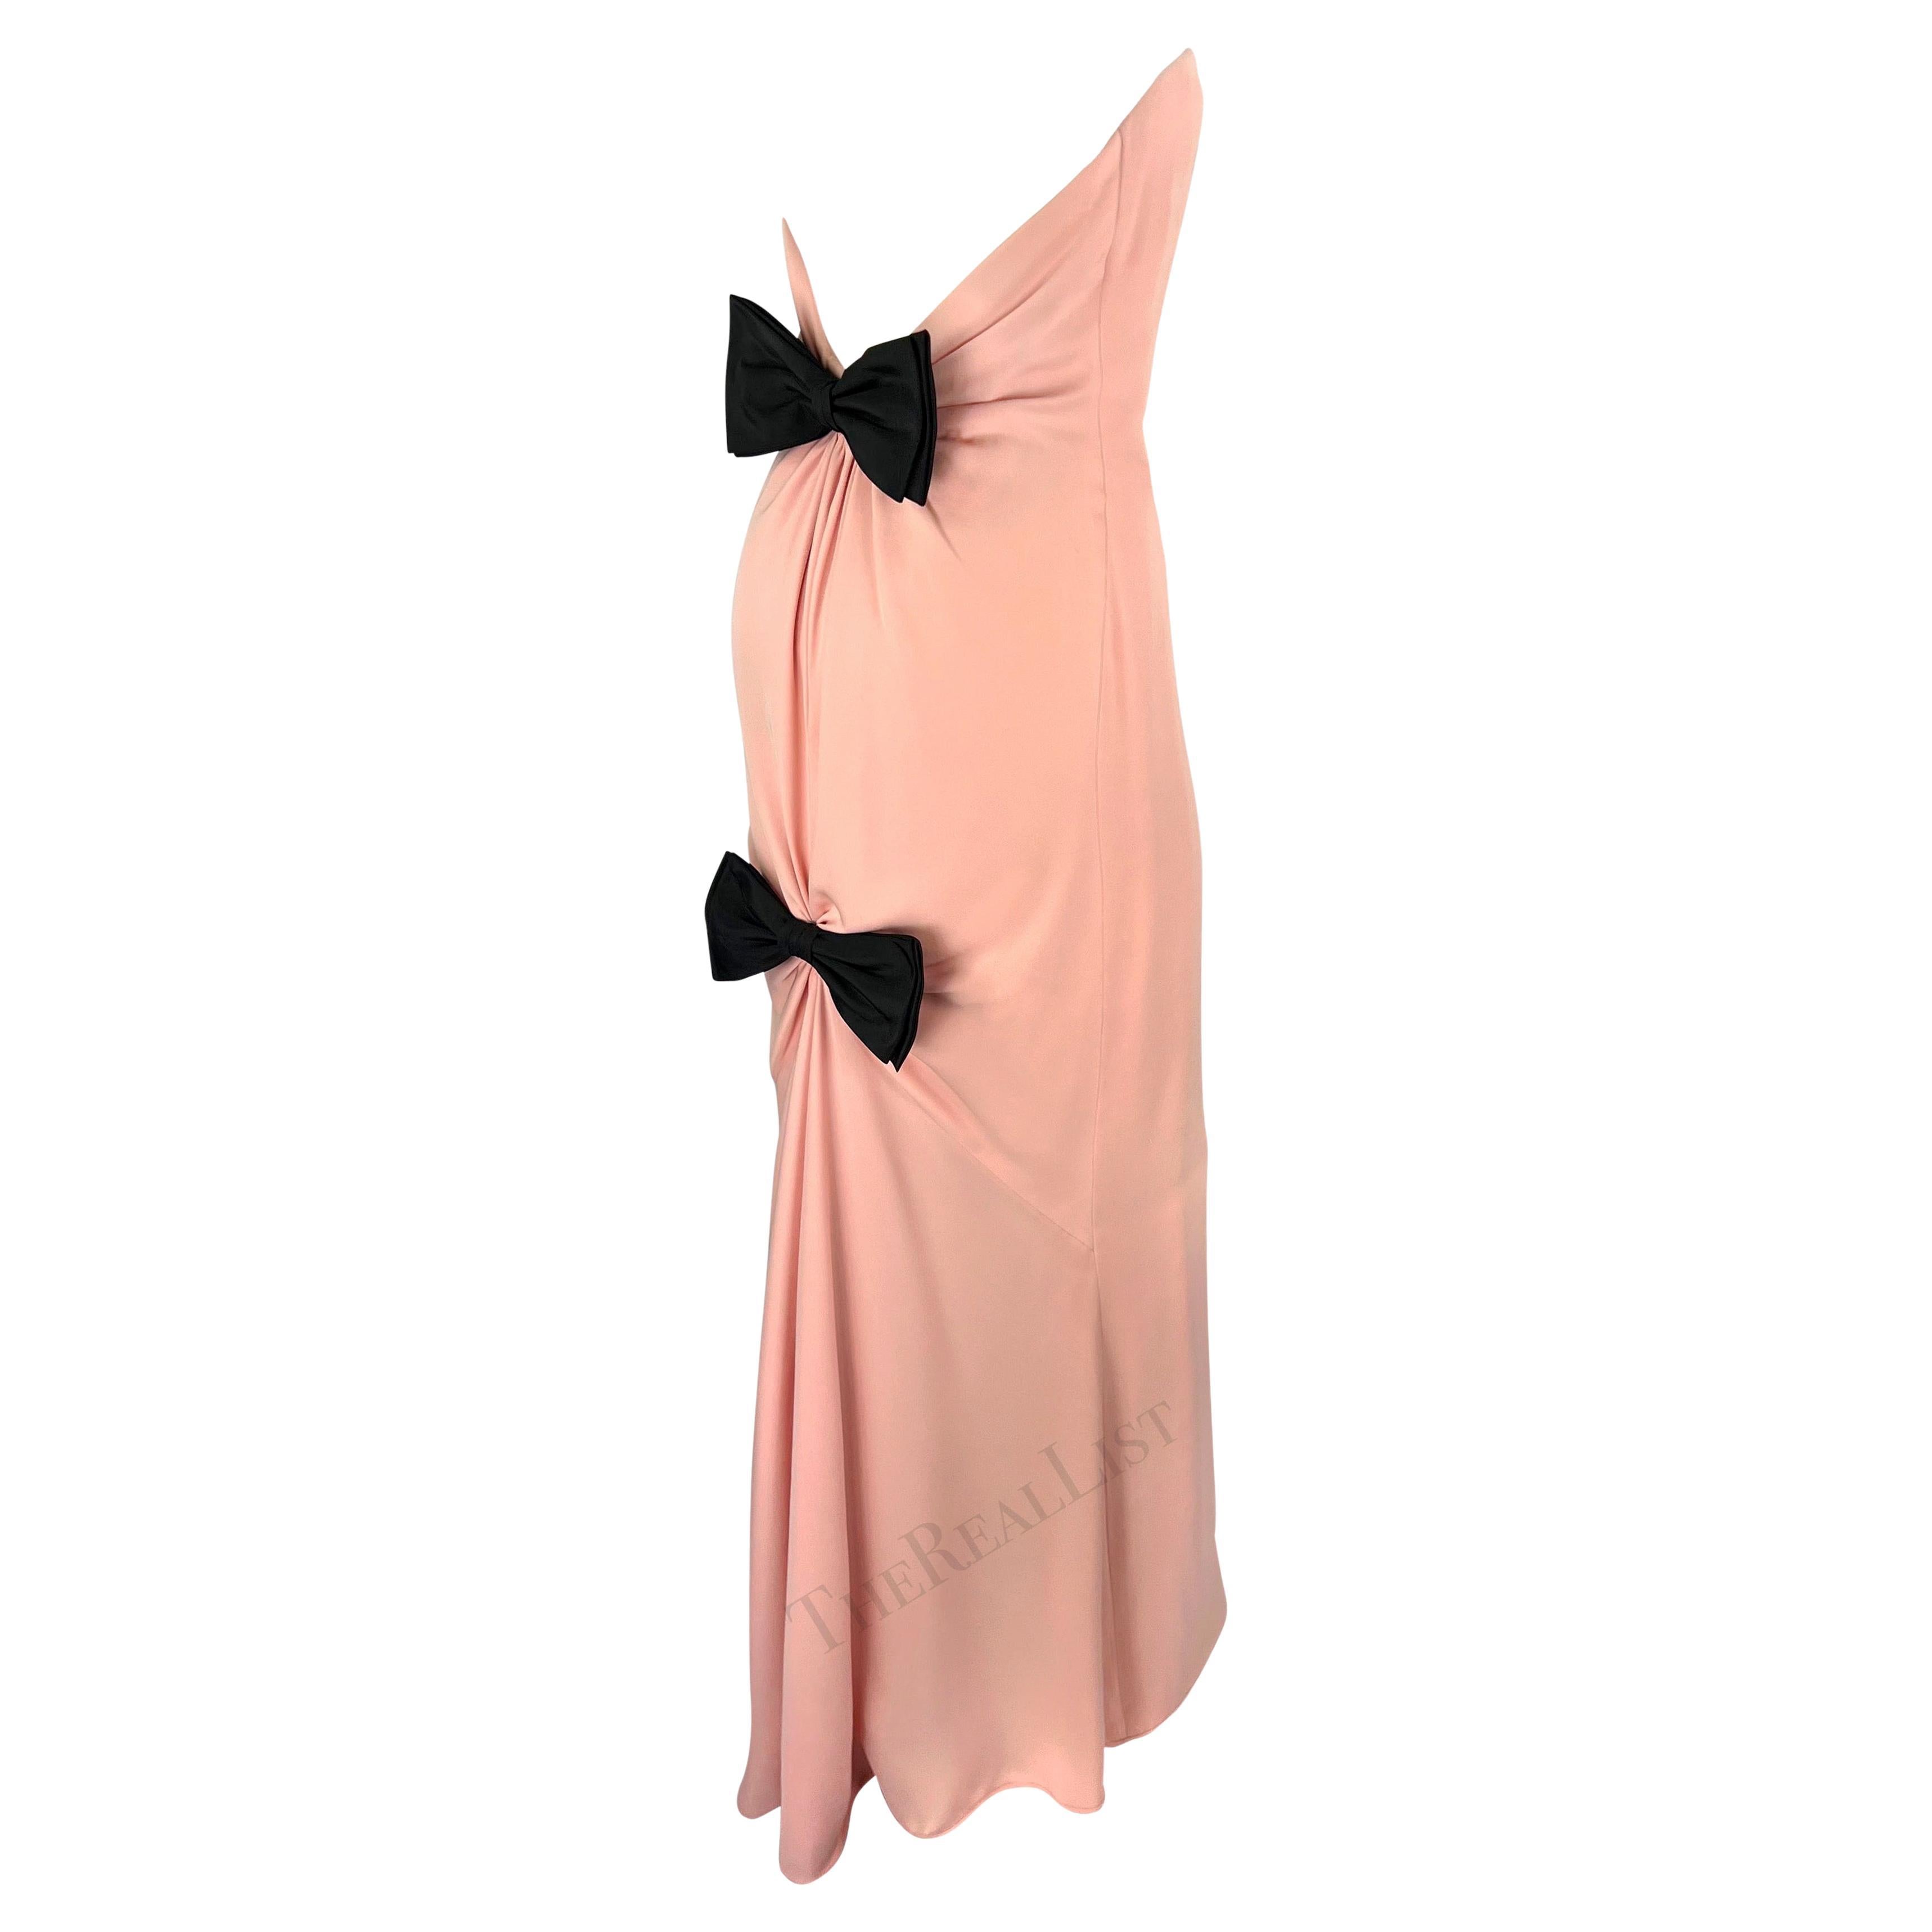 S/S 1985 Valentino Haute Couture Documented Pink Silk Chiffon Bow Strapless Gown For Sale 7